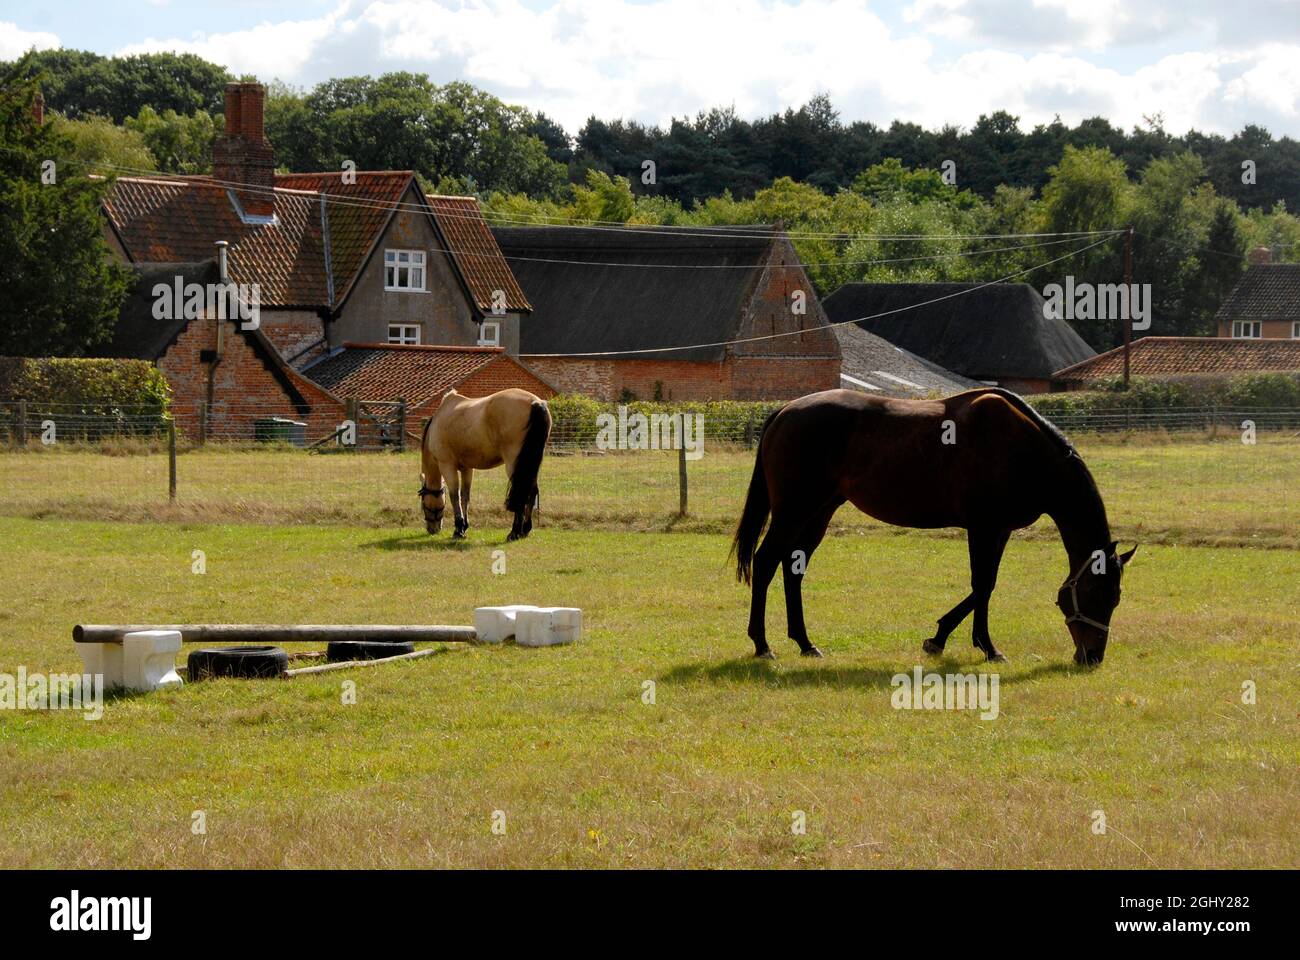 Two horses grazing in a field, Ranworth, Norfolk, England with fence and farm building beyond Stock Photo